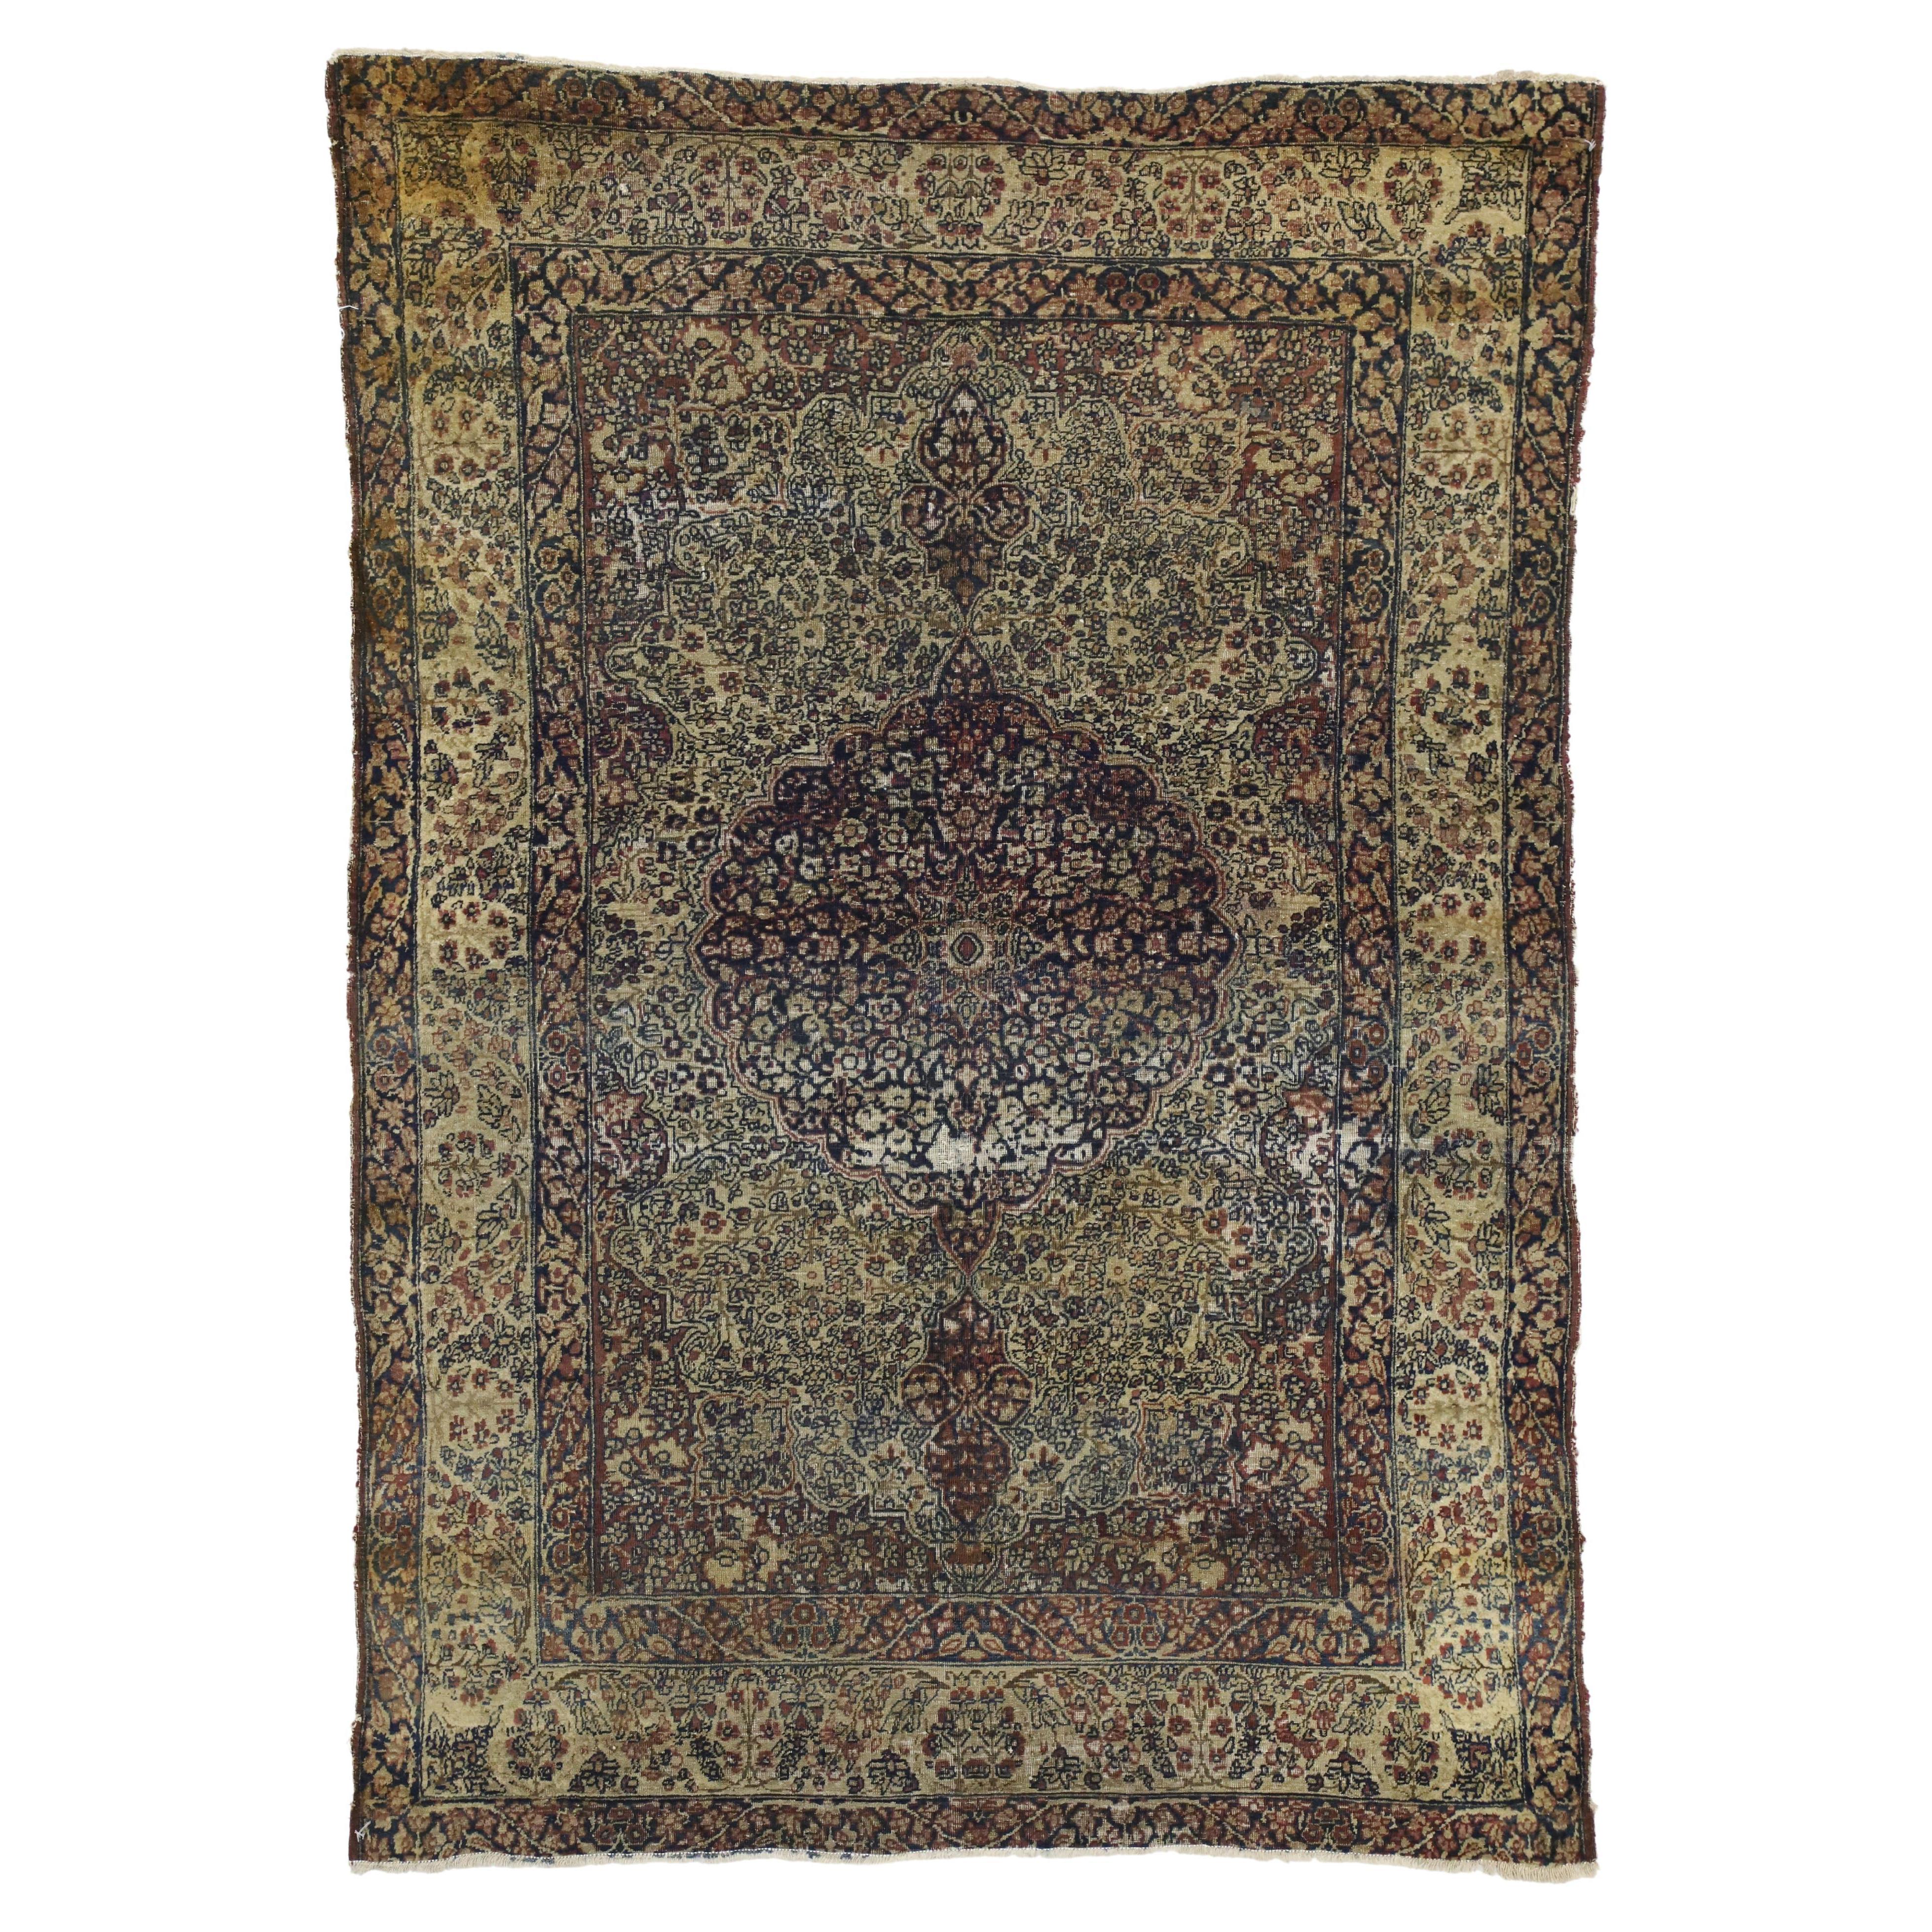 Distressed Antique Kermanshah Persian Rug with Rustic English Style